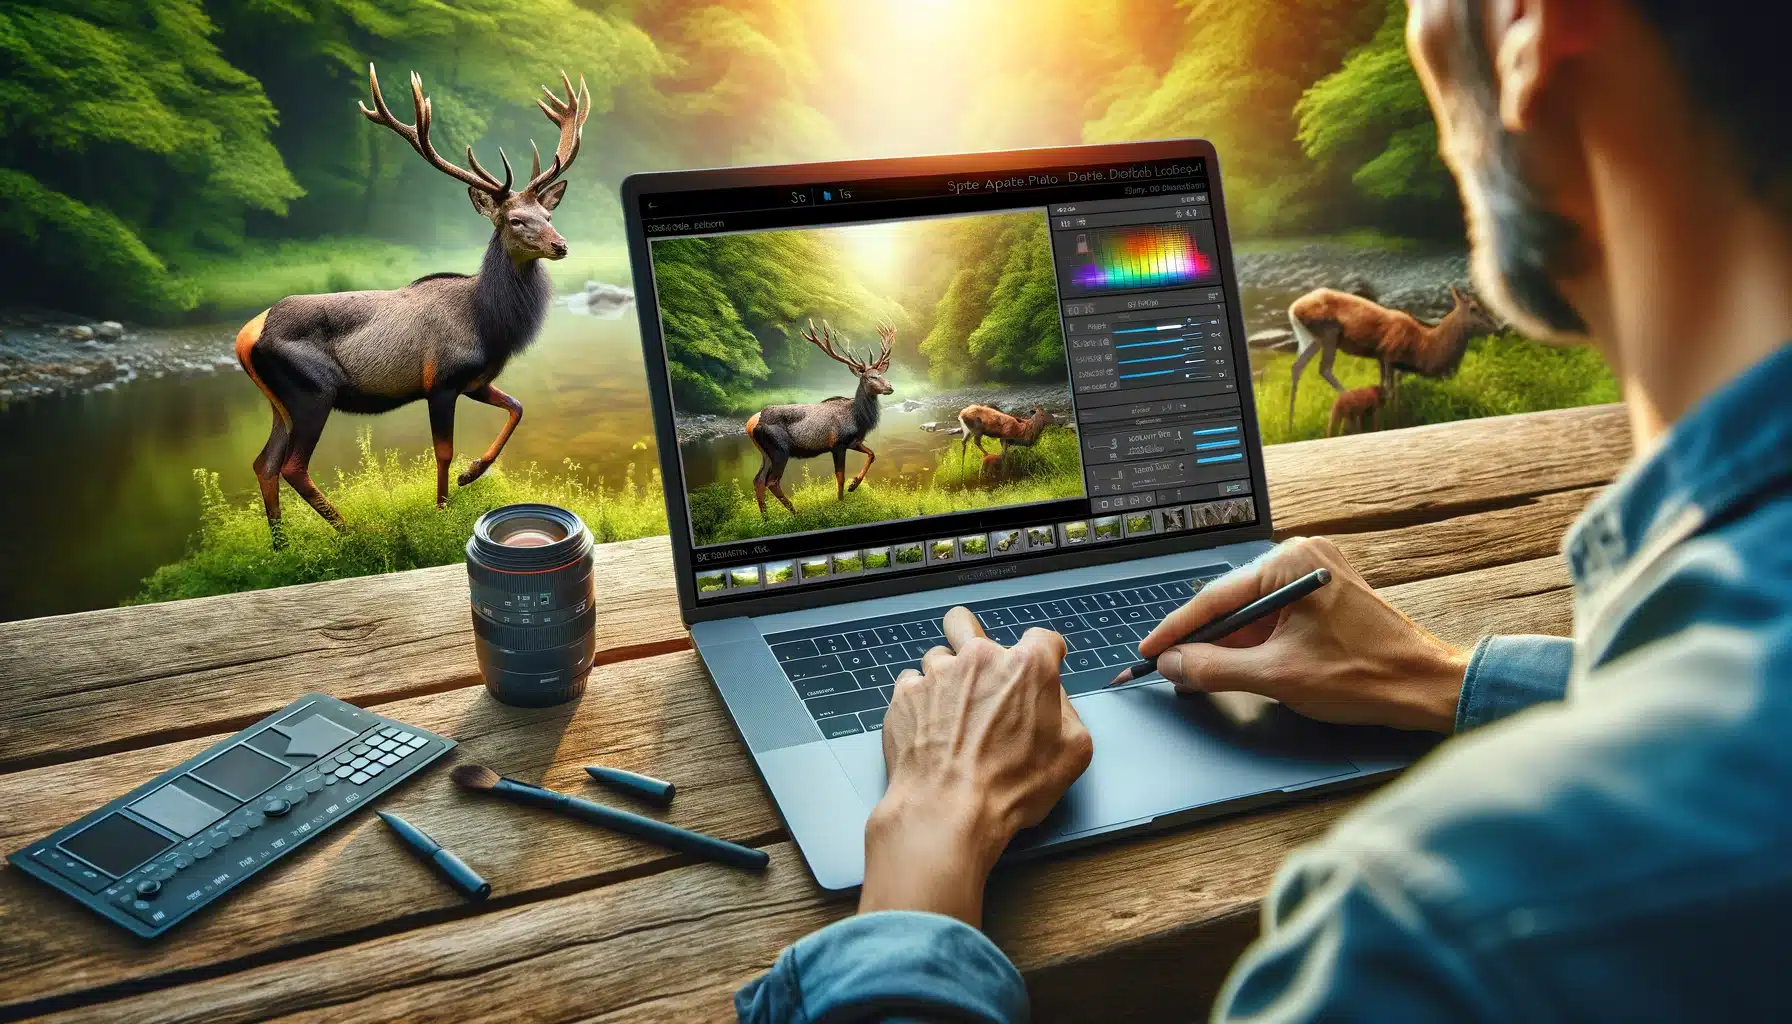 Wildlife photographer editing an animal photo on a laptop in a natural setting, showcasing the use of image editing software for professional enhancements.